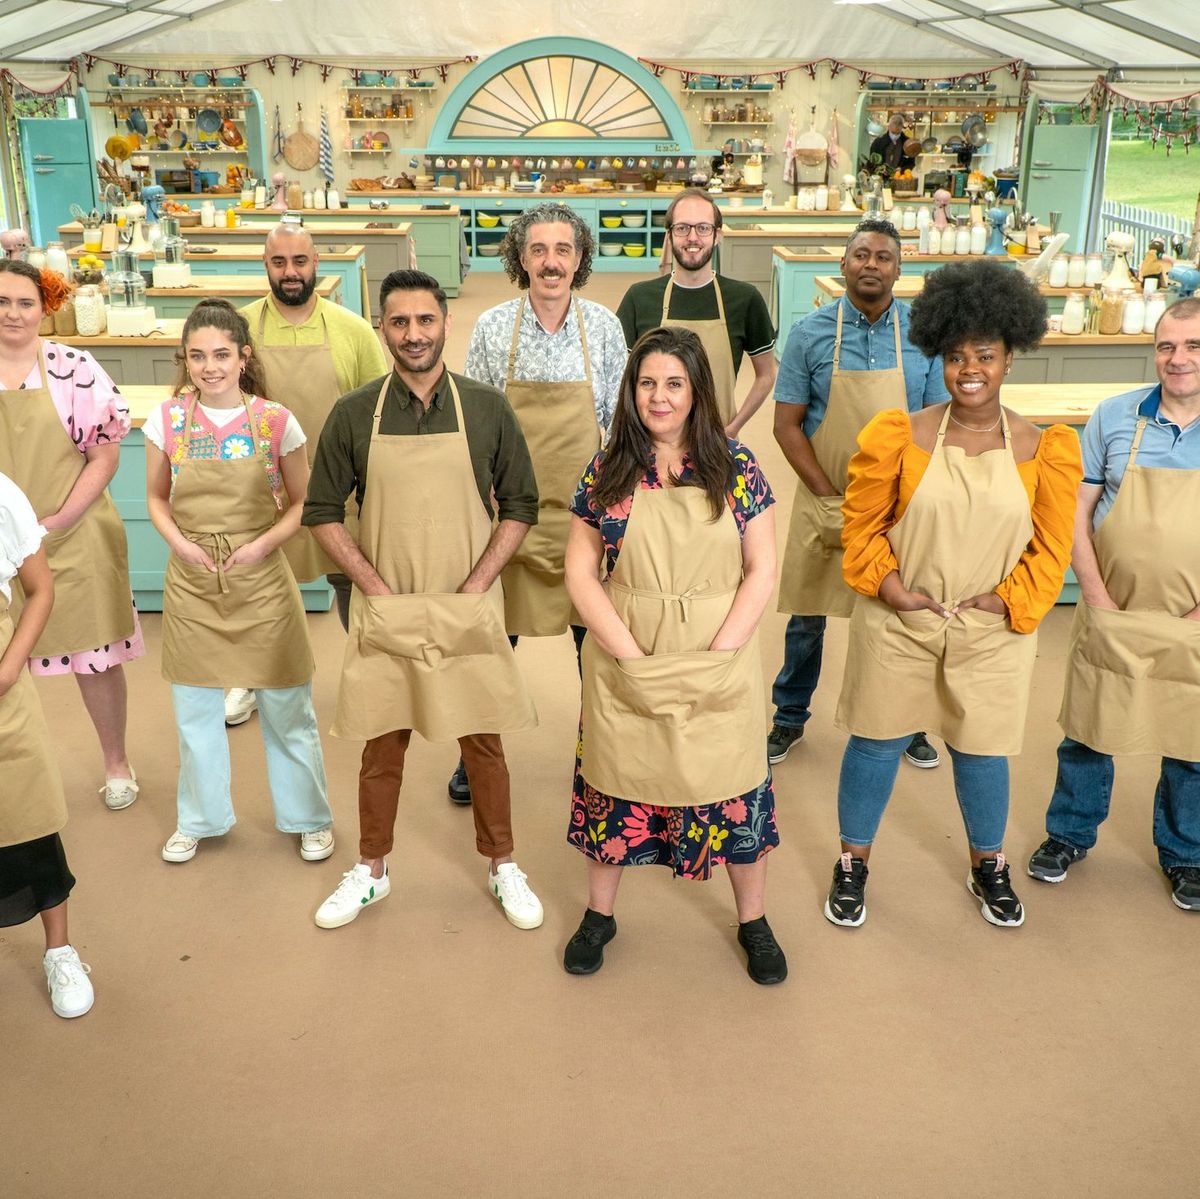 The Great British Baking Show Cast of Bakers in 2021 Marie Claire photo picture